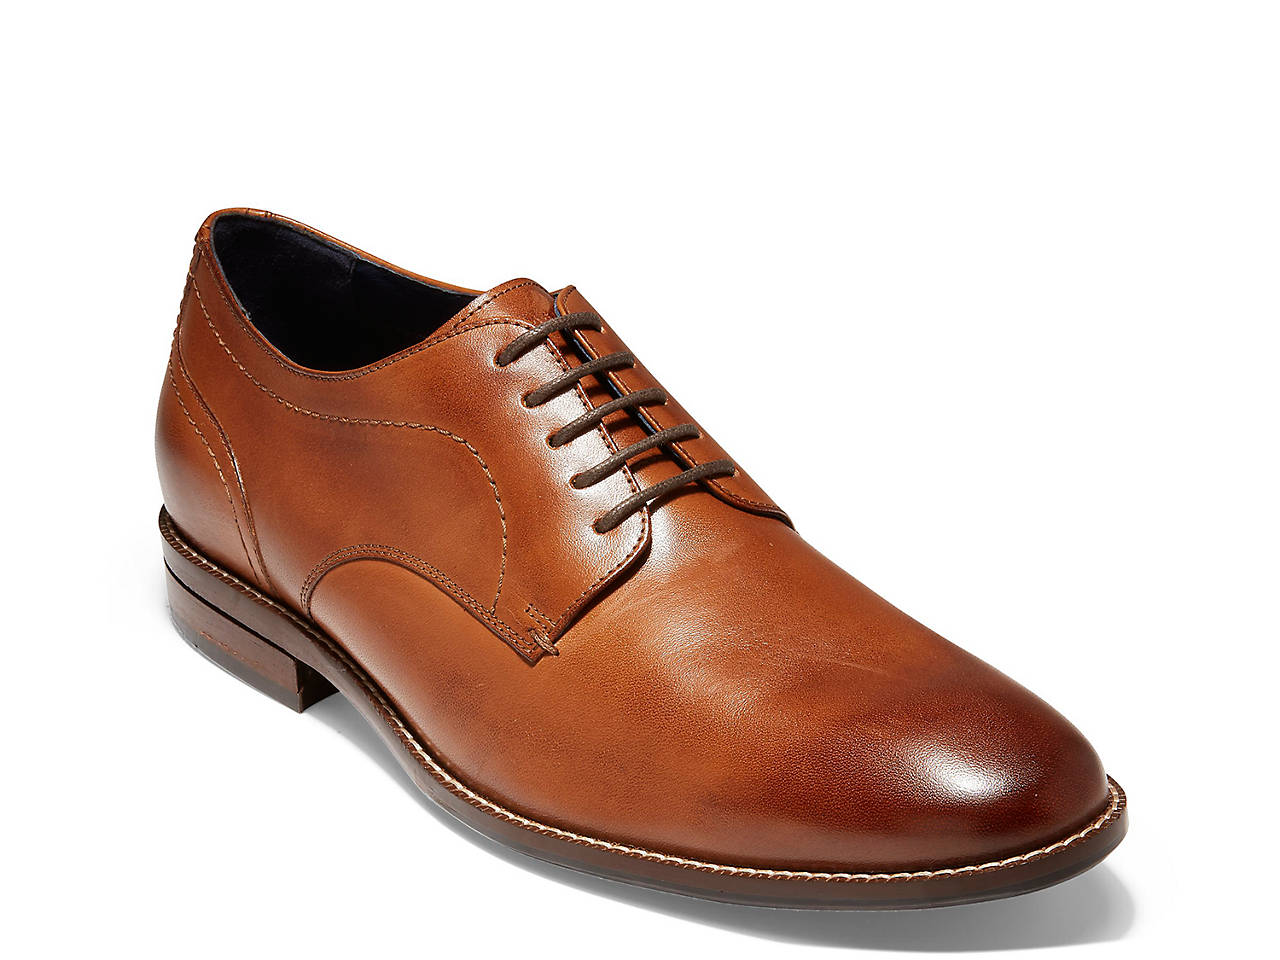 DSW Extra 50 Off + 20 Off Men's Dress Shoes Cole Haan